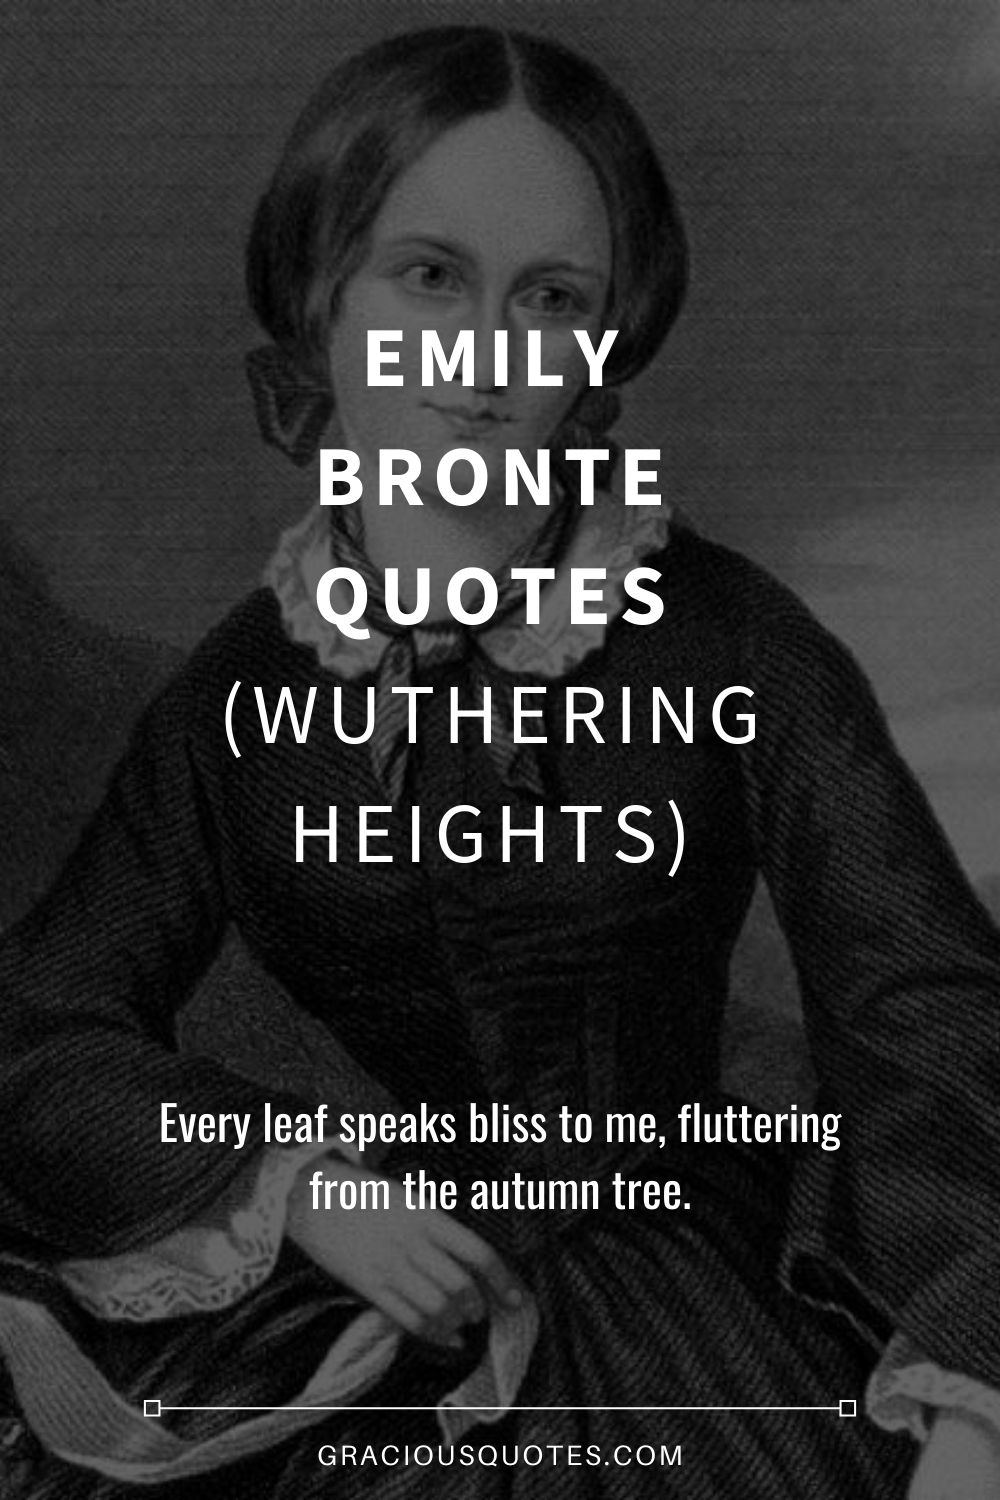 Emily Bronte Quotes (WUTHERING HEIGHTS) - Gracious Quotes